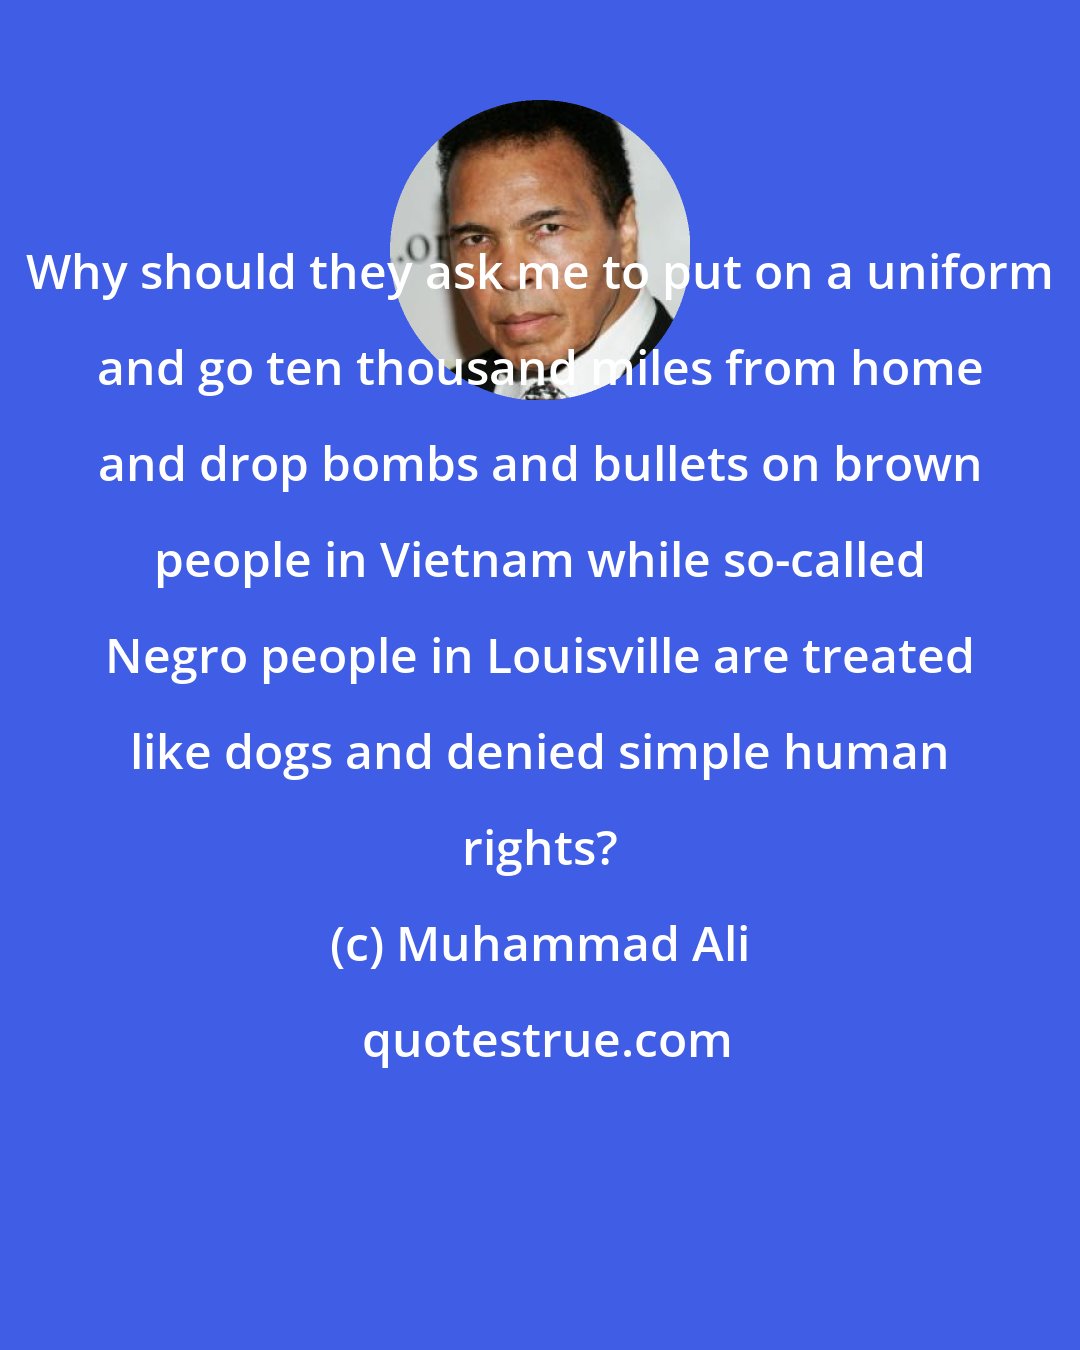 Muhammad Ali: Why should they ask me to put on a uniform and go ten thousand miles from home and drop bombs and bullets on brown people in Vietnam while so-called Negro people in Louisville are treated like dogs and denied simple human rights?